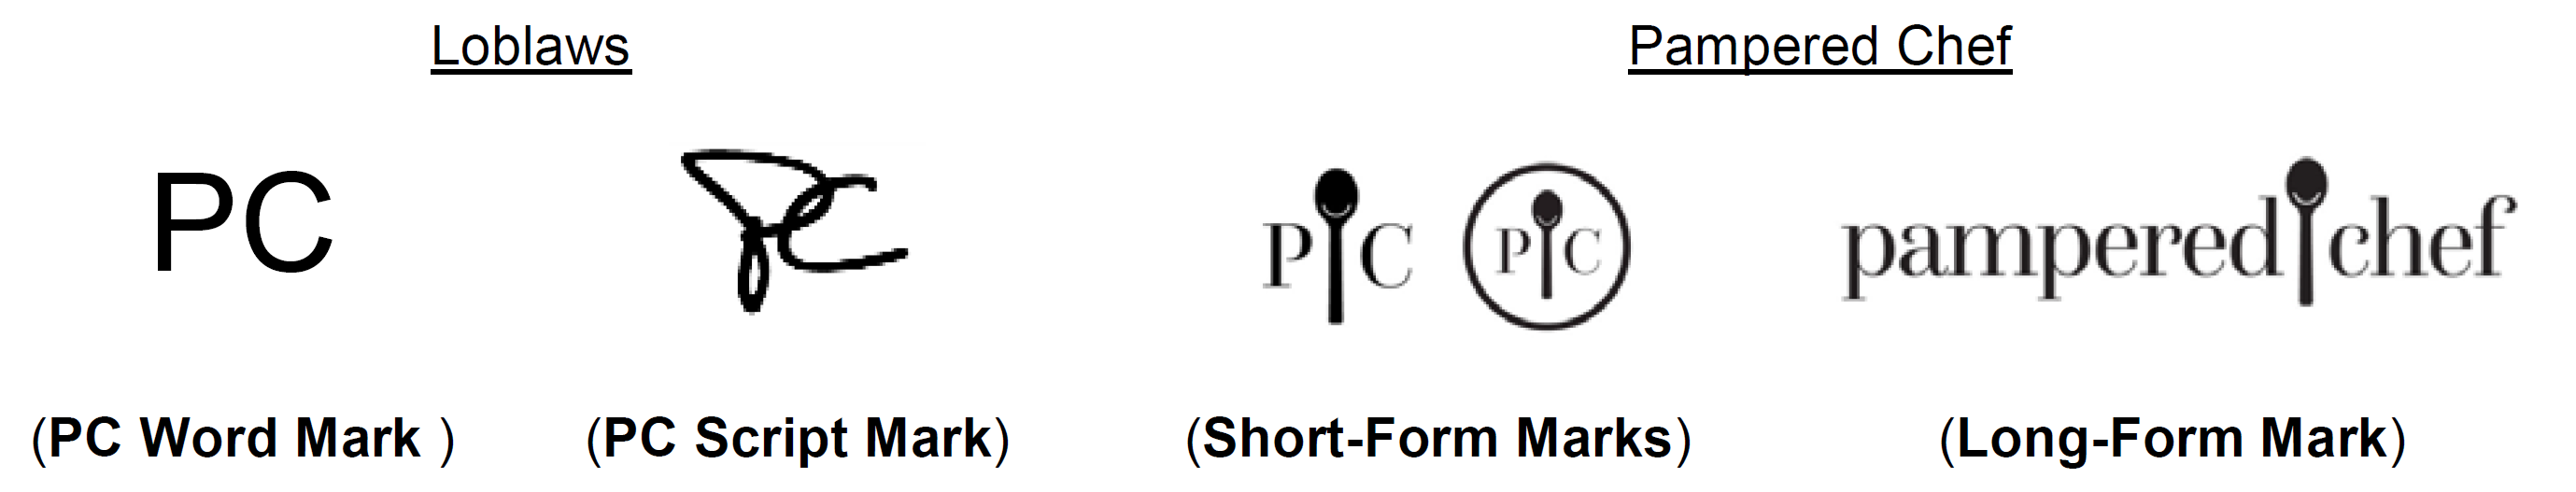 pc and pampered chef trademark logos